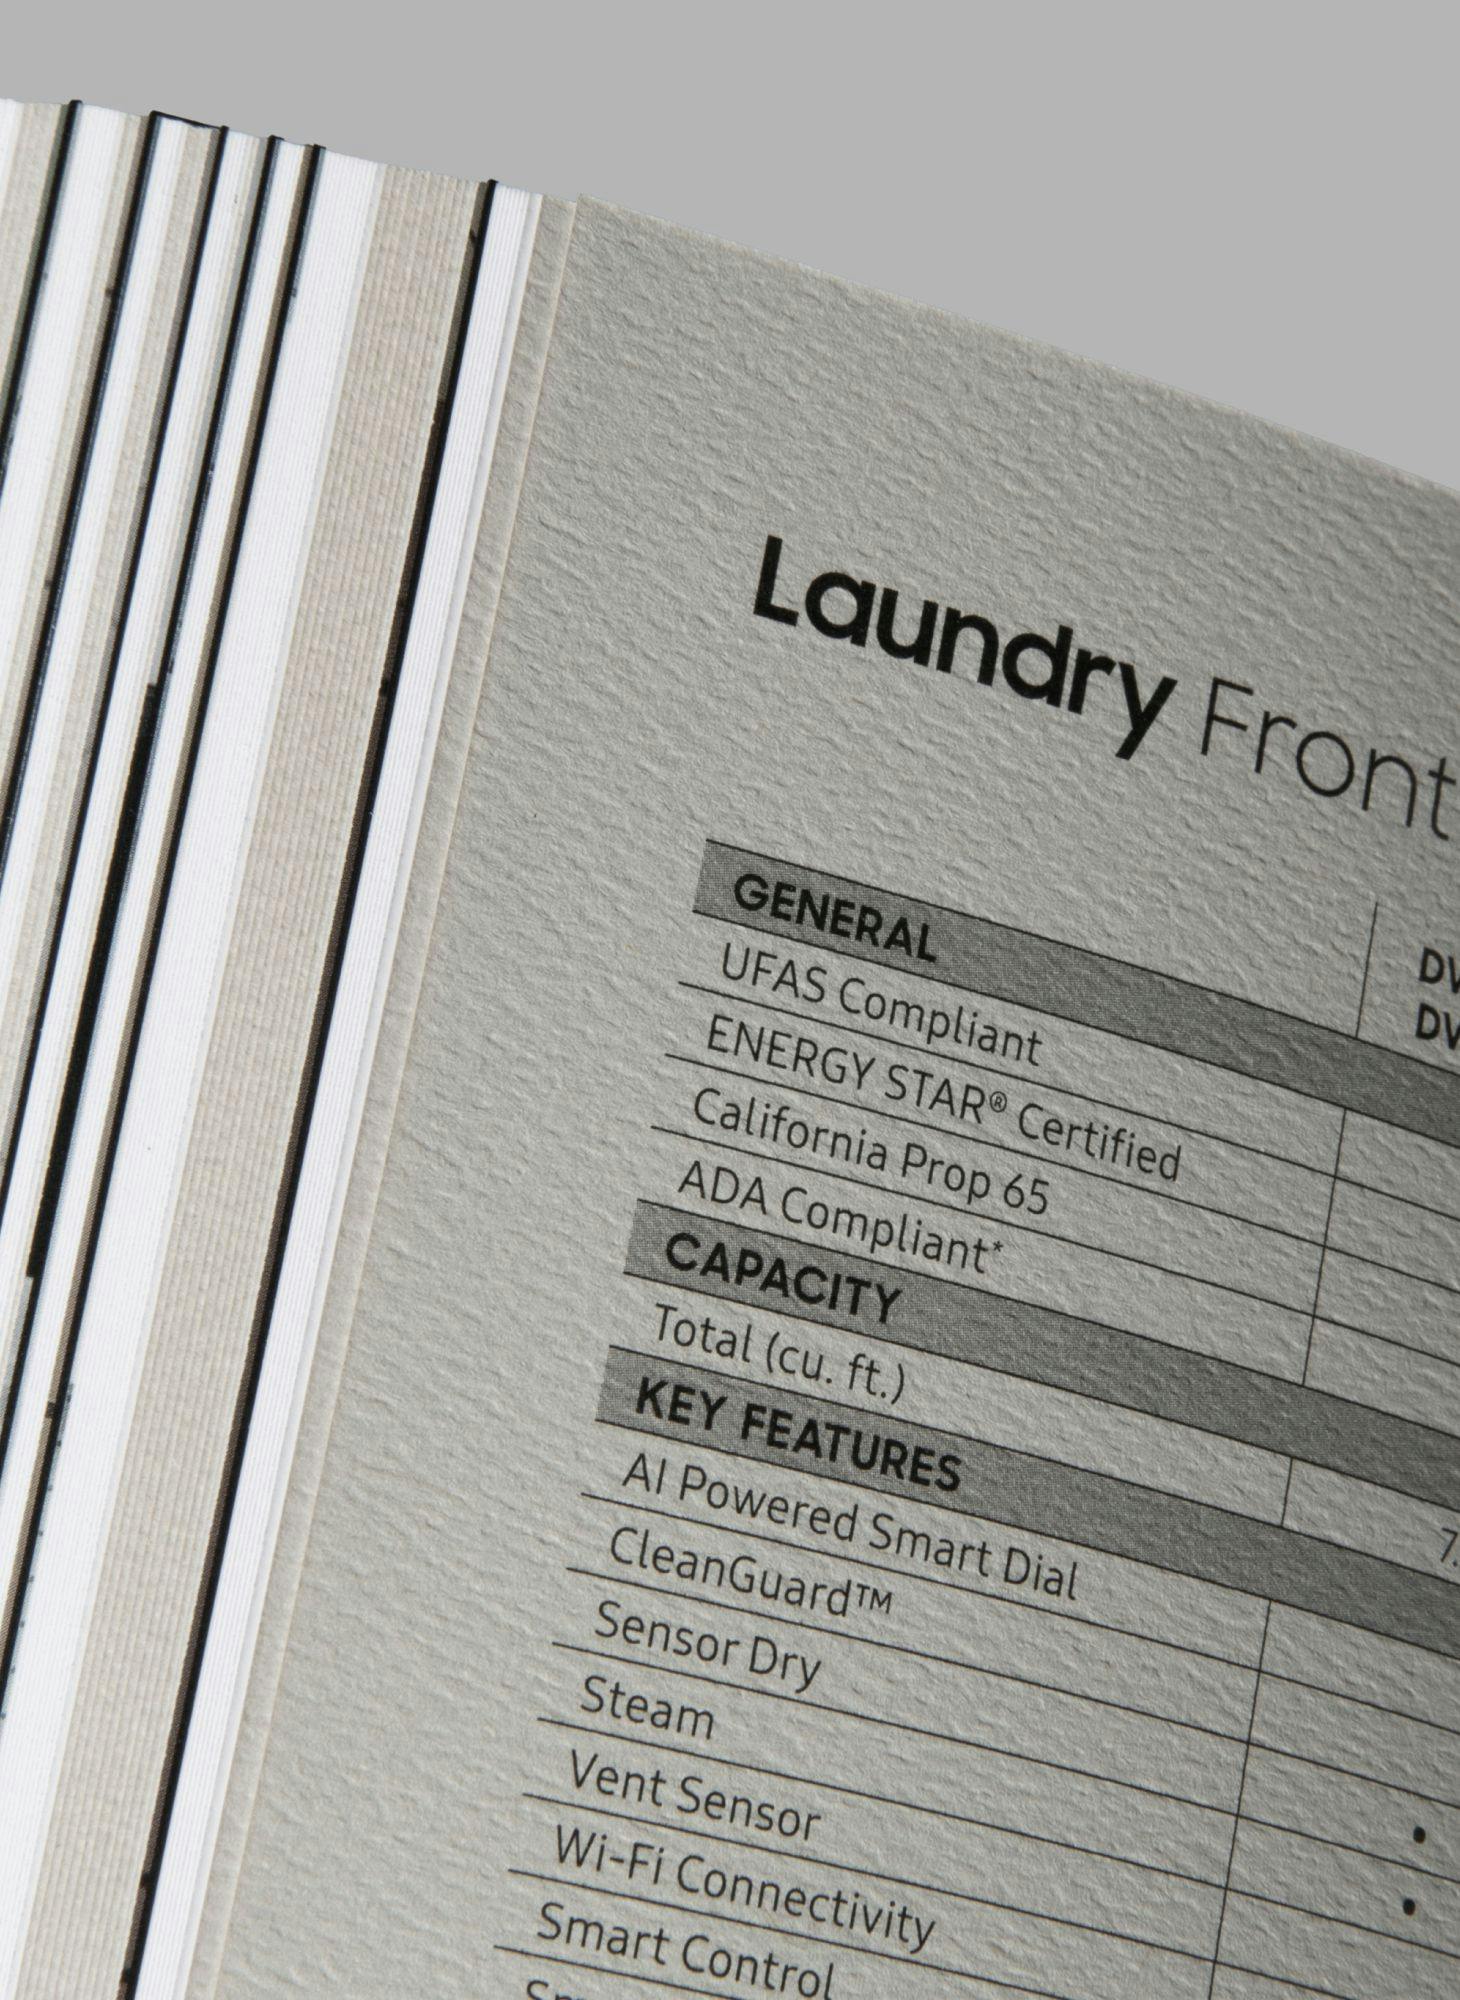 Snippet of the Laundry Section of Samsung's Home Appliance Catalog